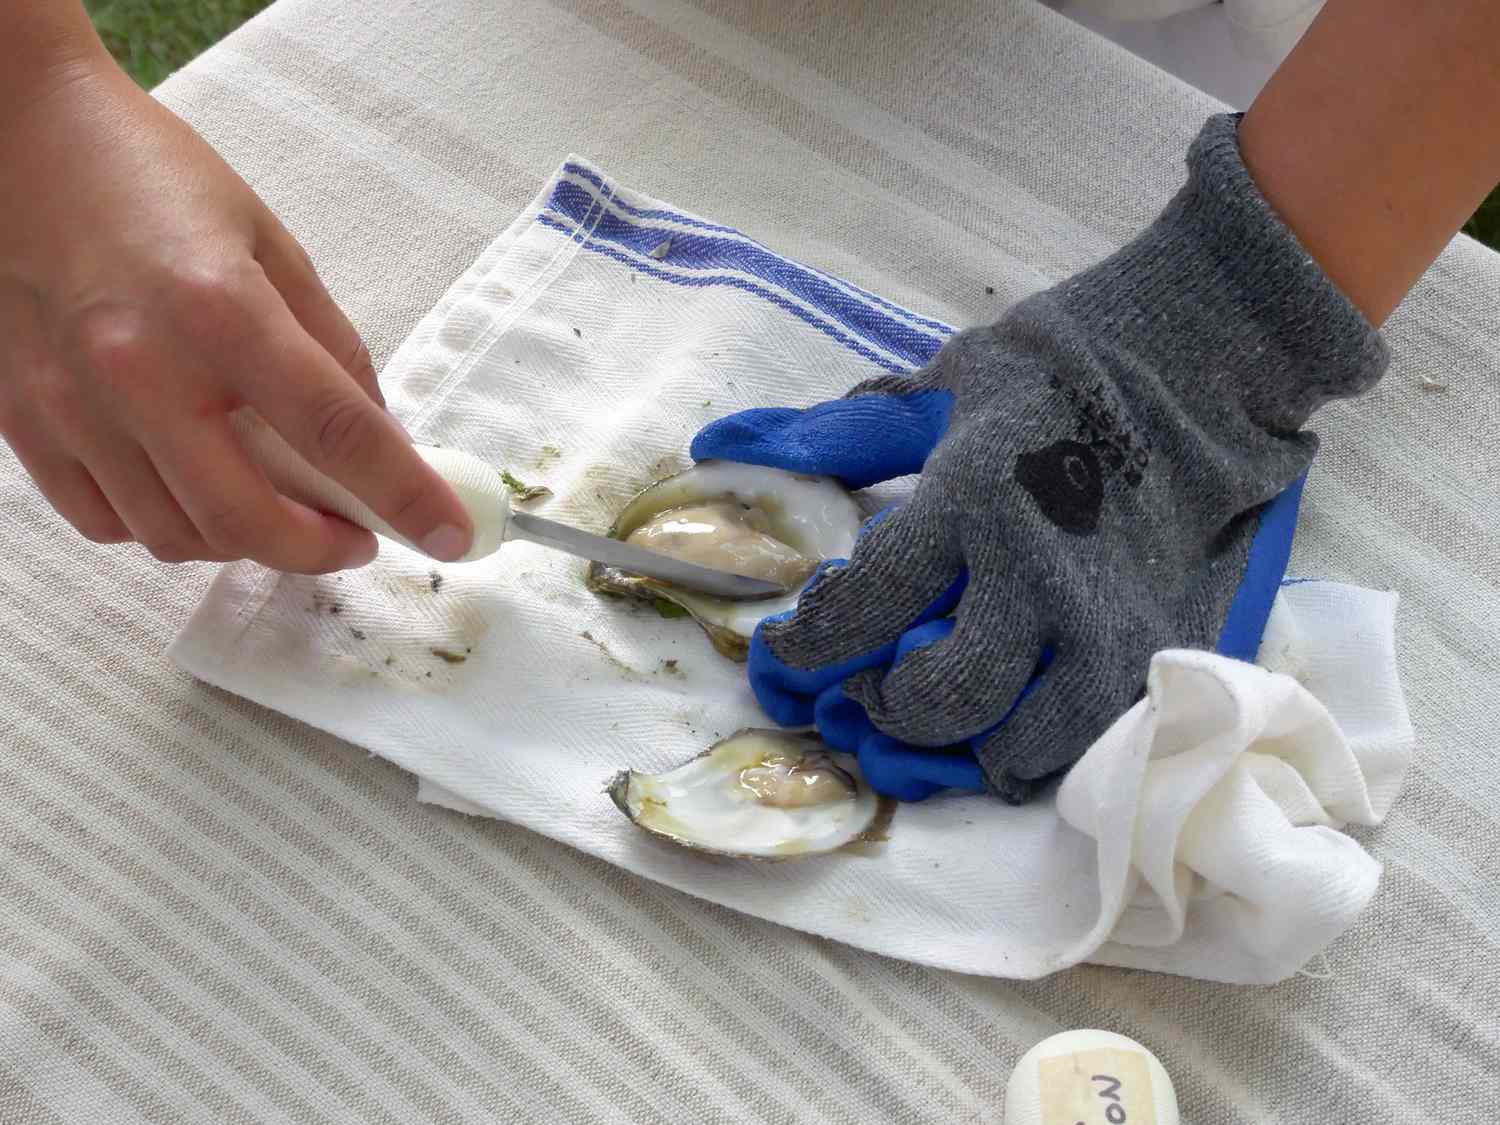 using an oyster knife to cut the oyster's abductor muscle